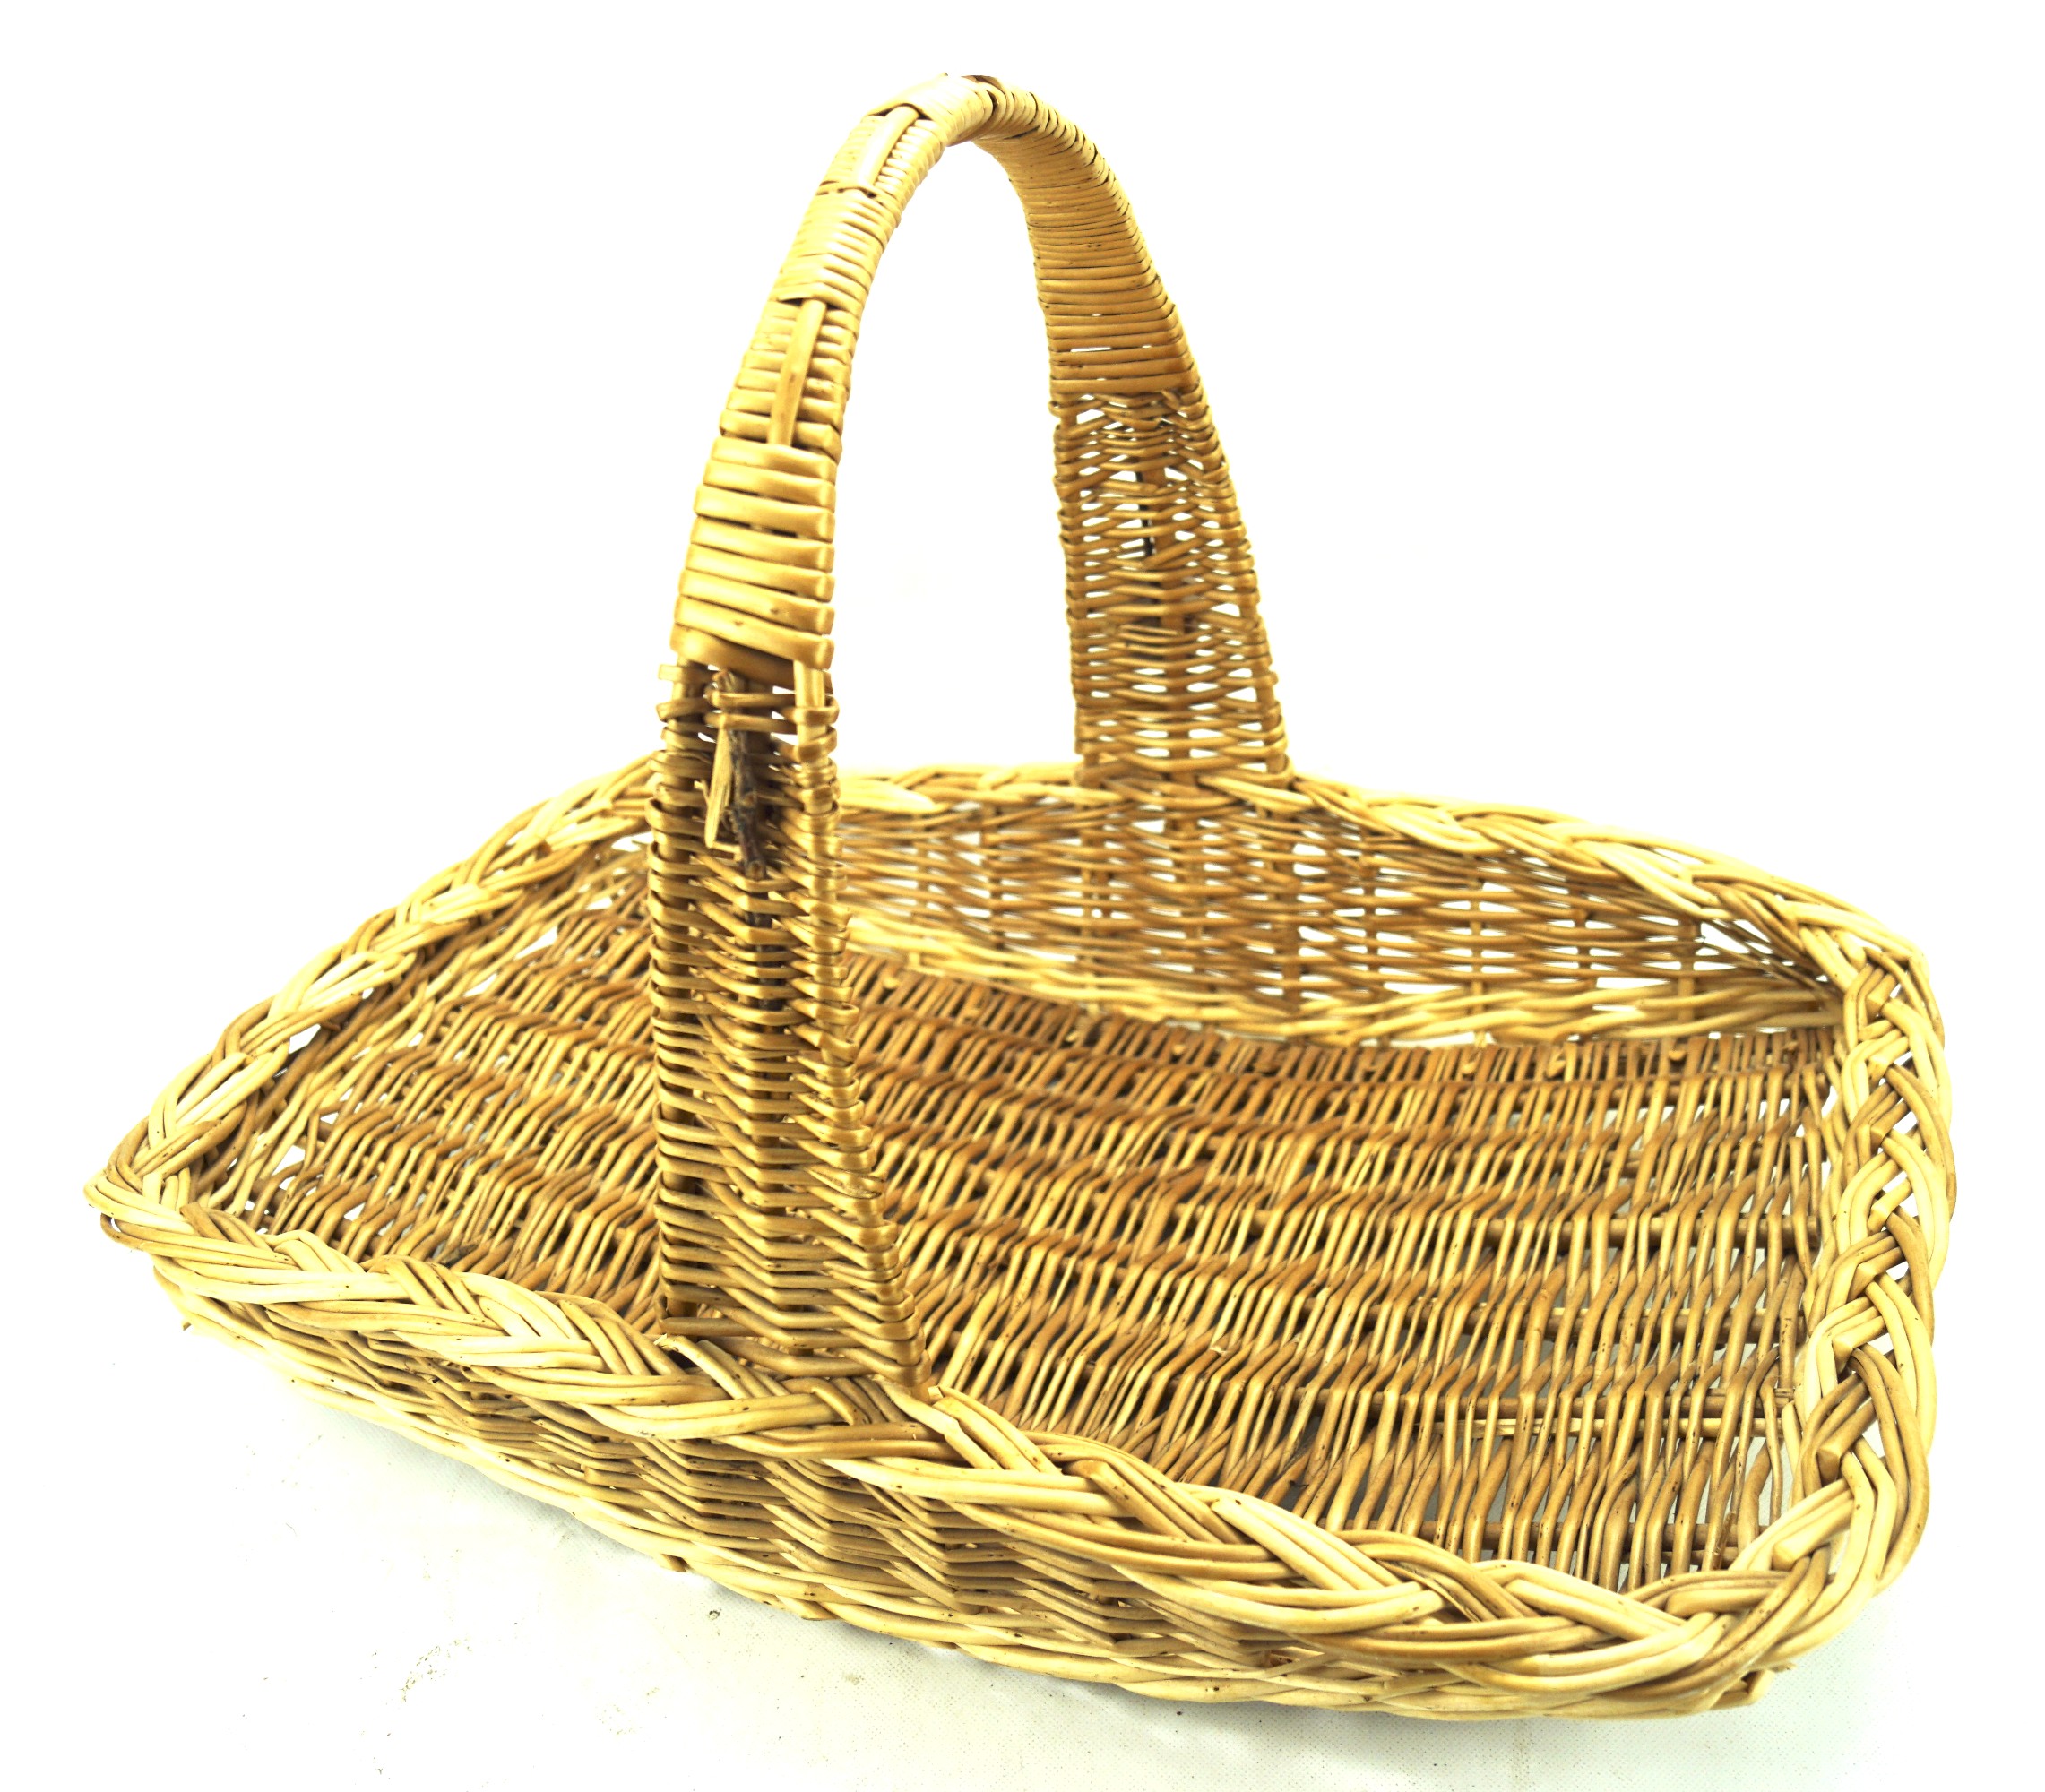 A wicker basket with a single handle, L58cm. - Image 2 of 2